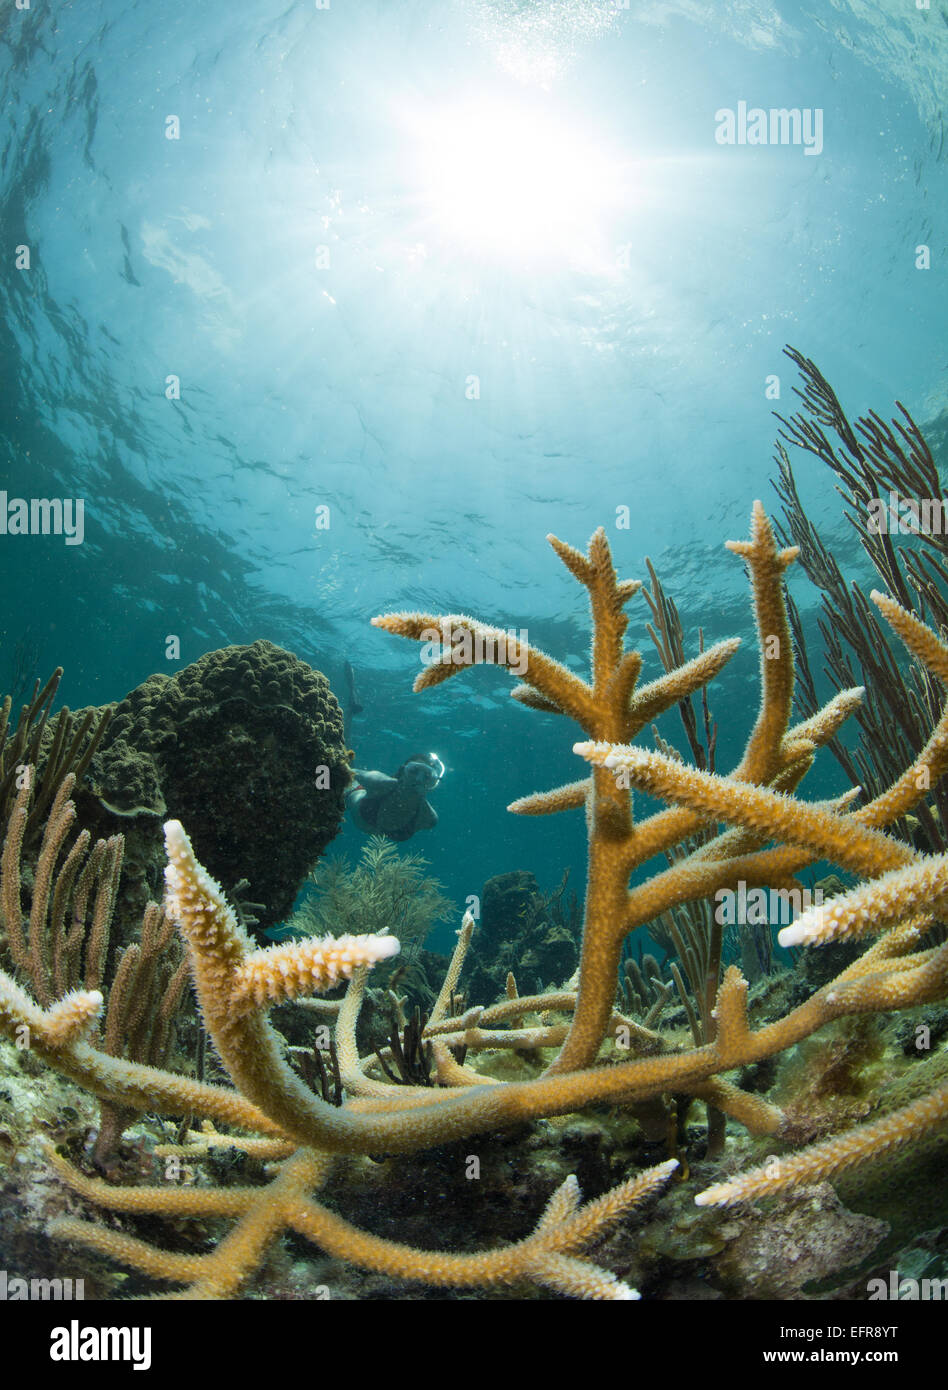 Snorkeler framed by hard coral. Stock Photo